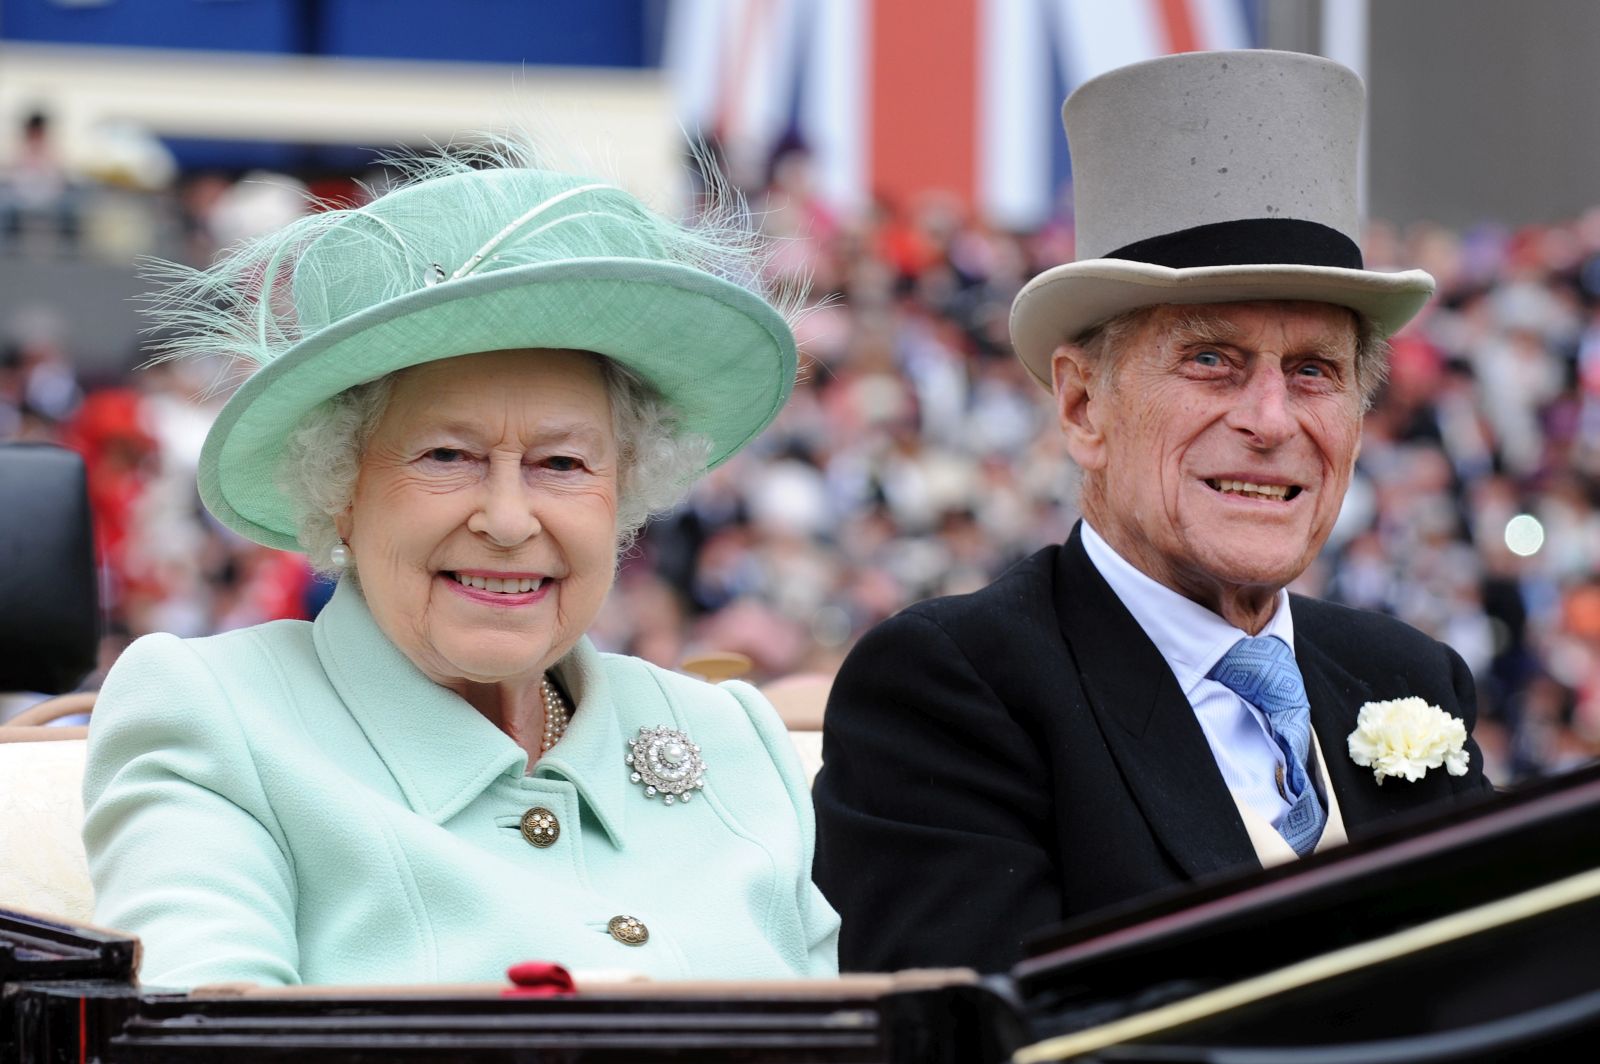 epa09123944 (FILE) - A picture dated 21 June 2012 shows Britain's Queen Elizabeth II (L) and her husband Prince Philip, Duke of Edinburgh arriving to attend Ladies Day at Royal Ascot race meeting, in Ascot, Britain  (reissued 09 April 2021. According to the Buckingham Palace, Prince Philip has died aged 99.  EPA/ANDY RAIN